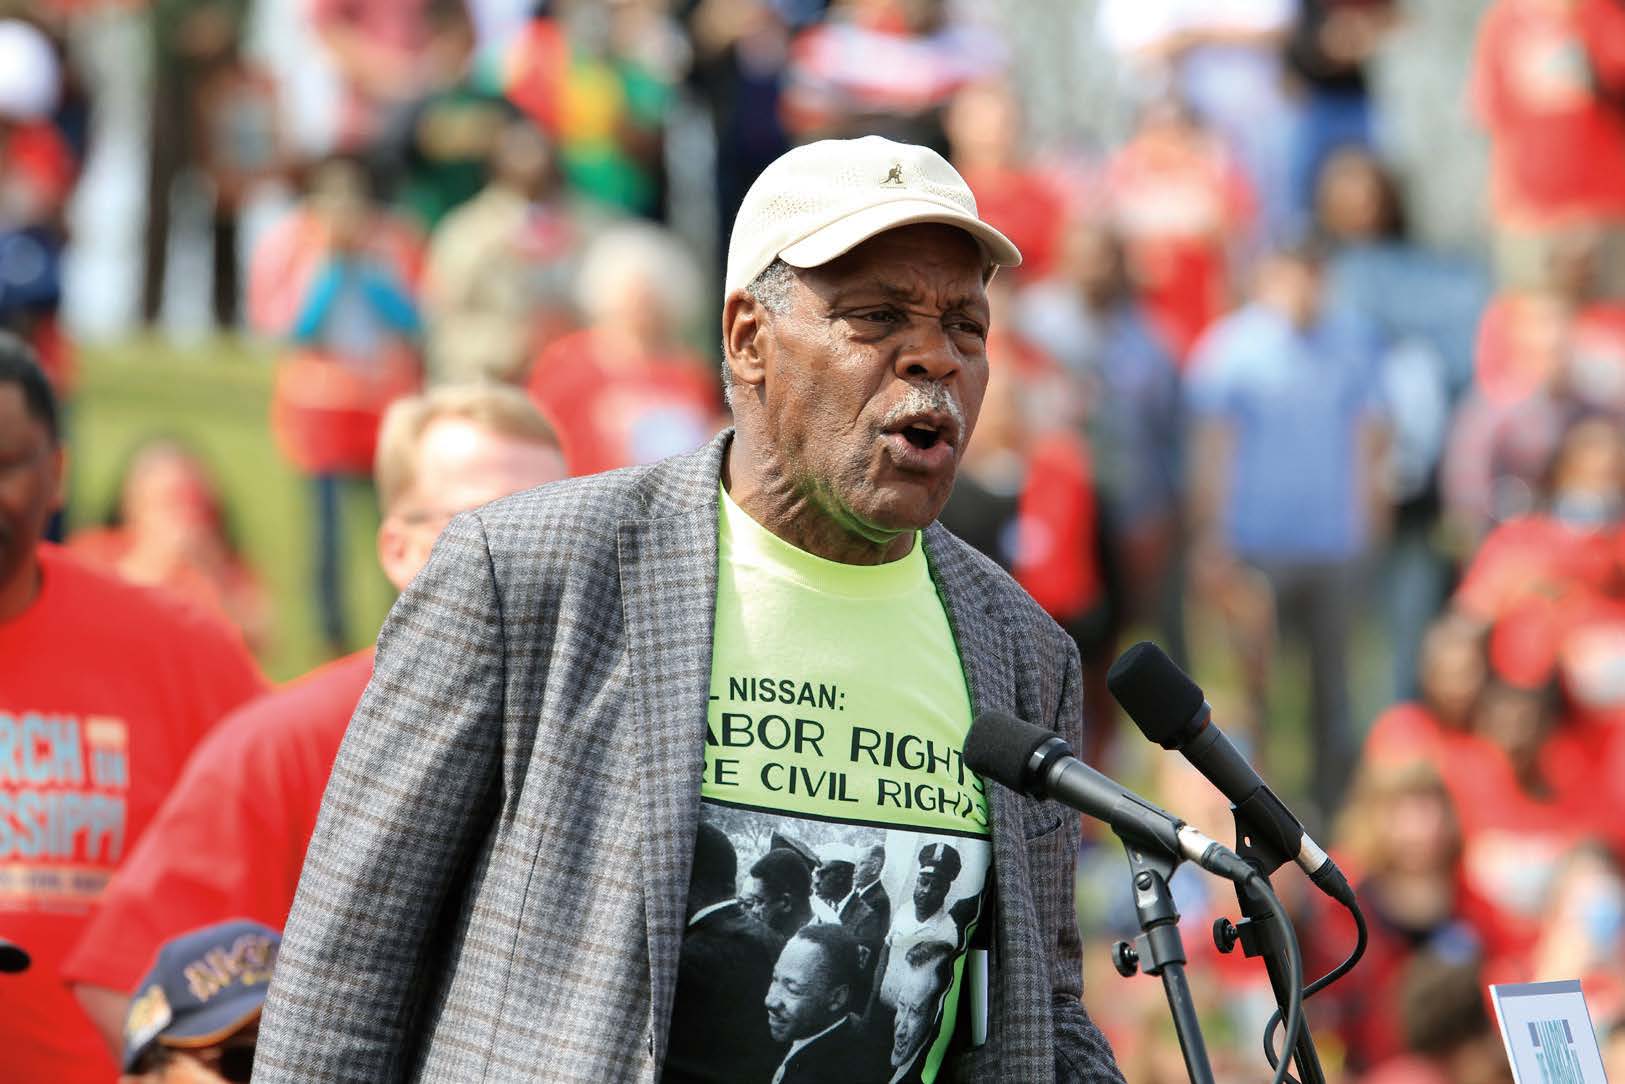 Danny Glover during a protest for labor rights.